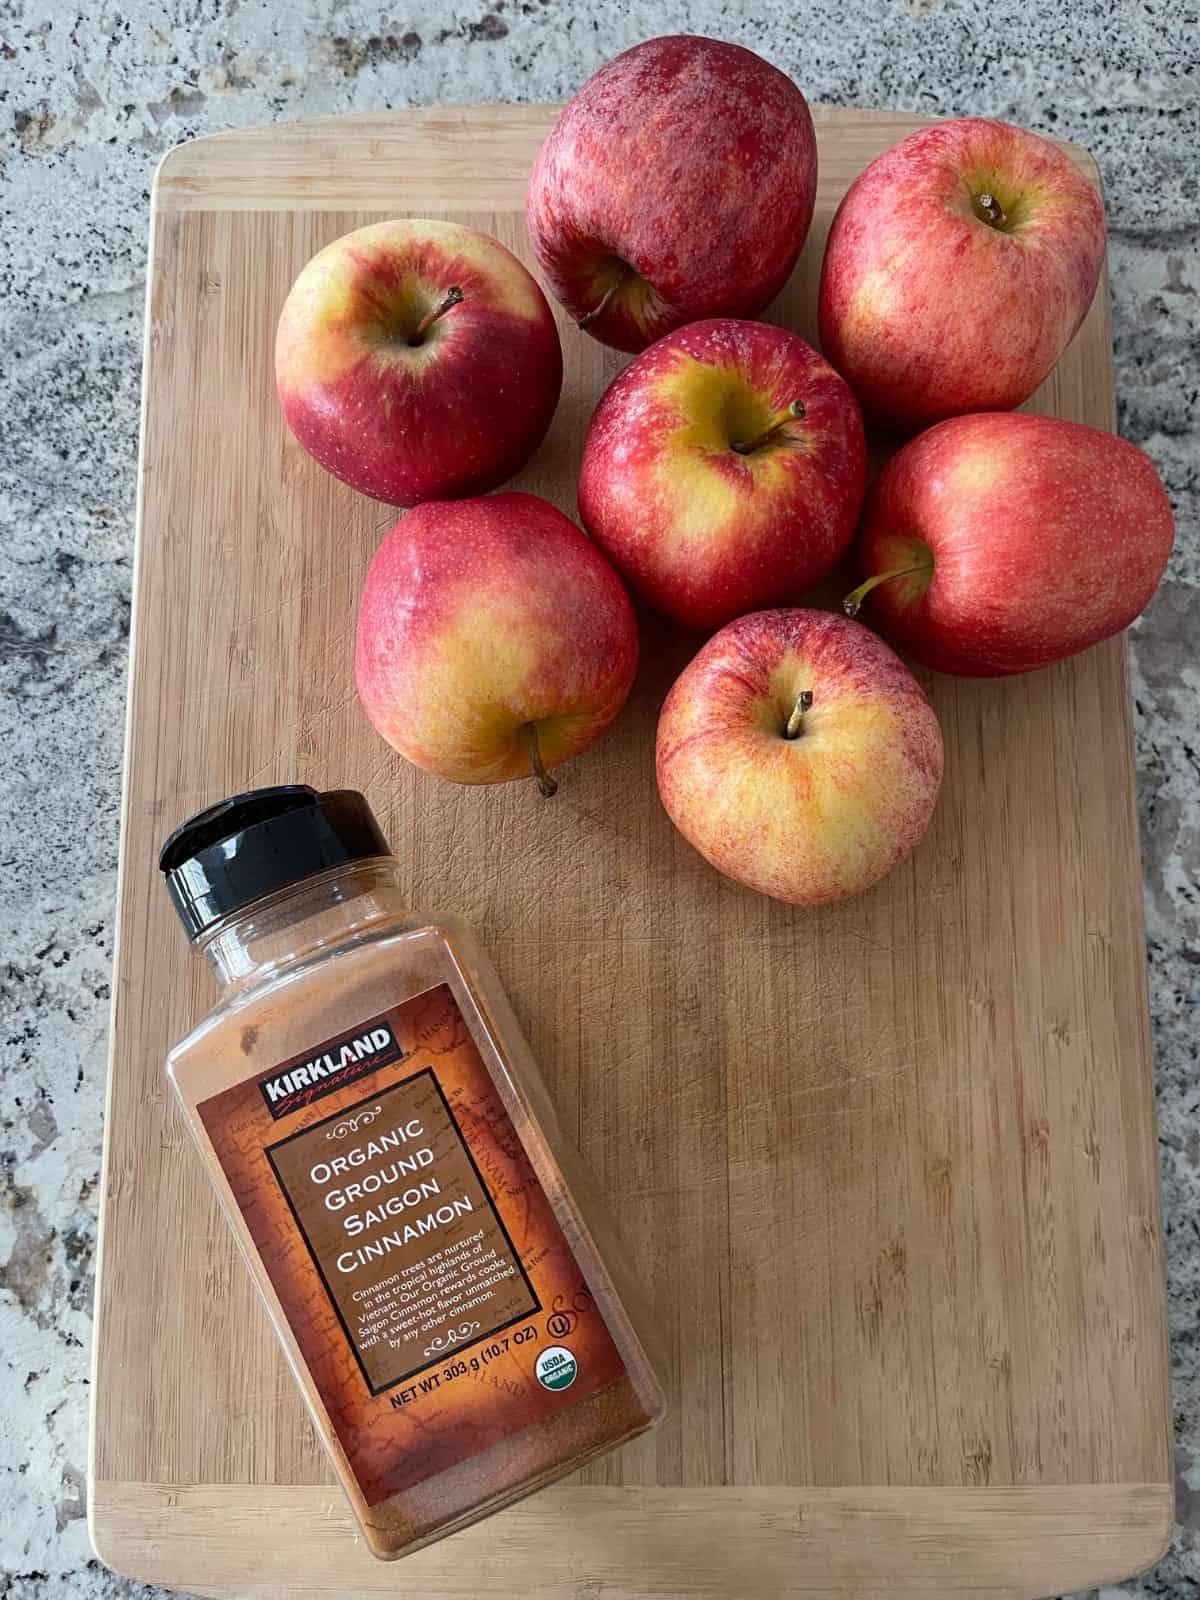 Fresh apples and container of organic ground cinnamon on bamboo cutting board.